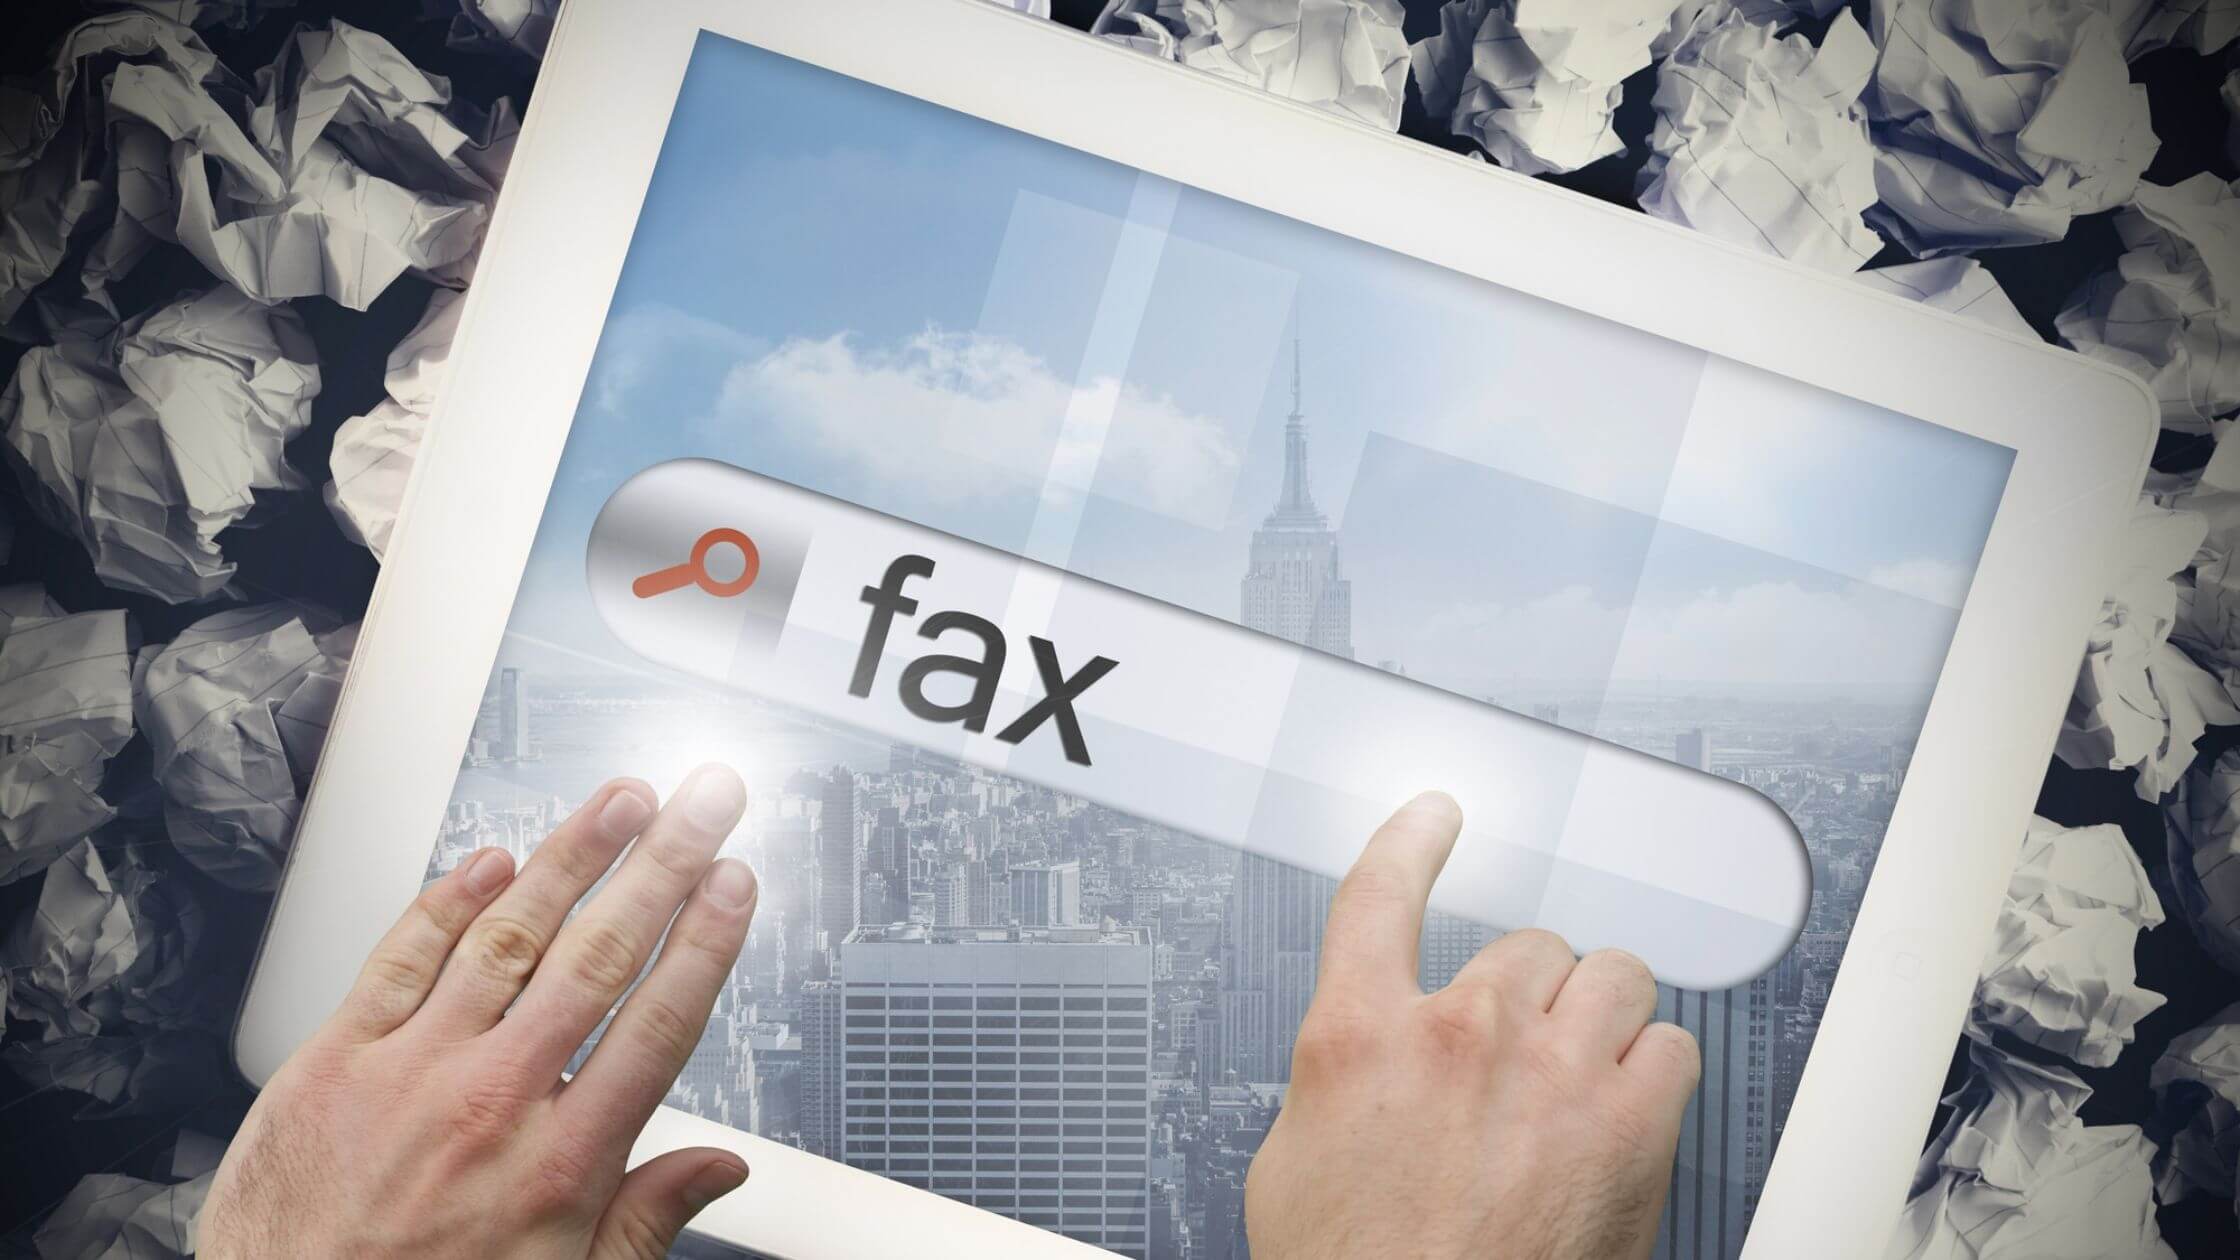 5 Common Issues With Online Faxing And How To Fix Them